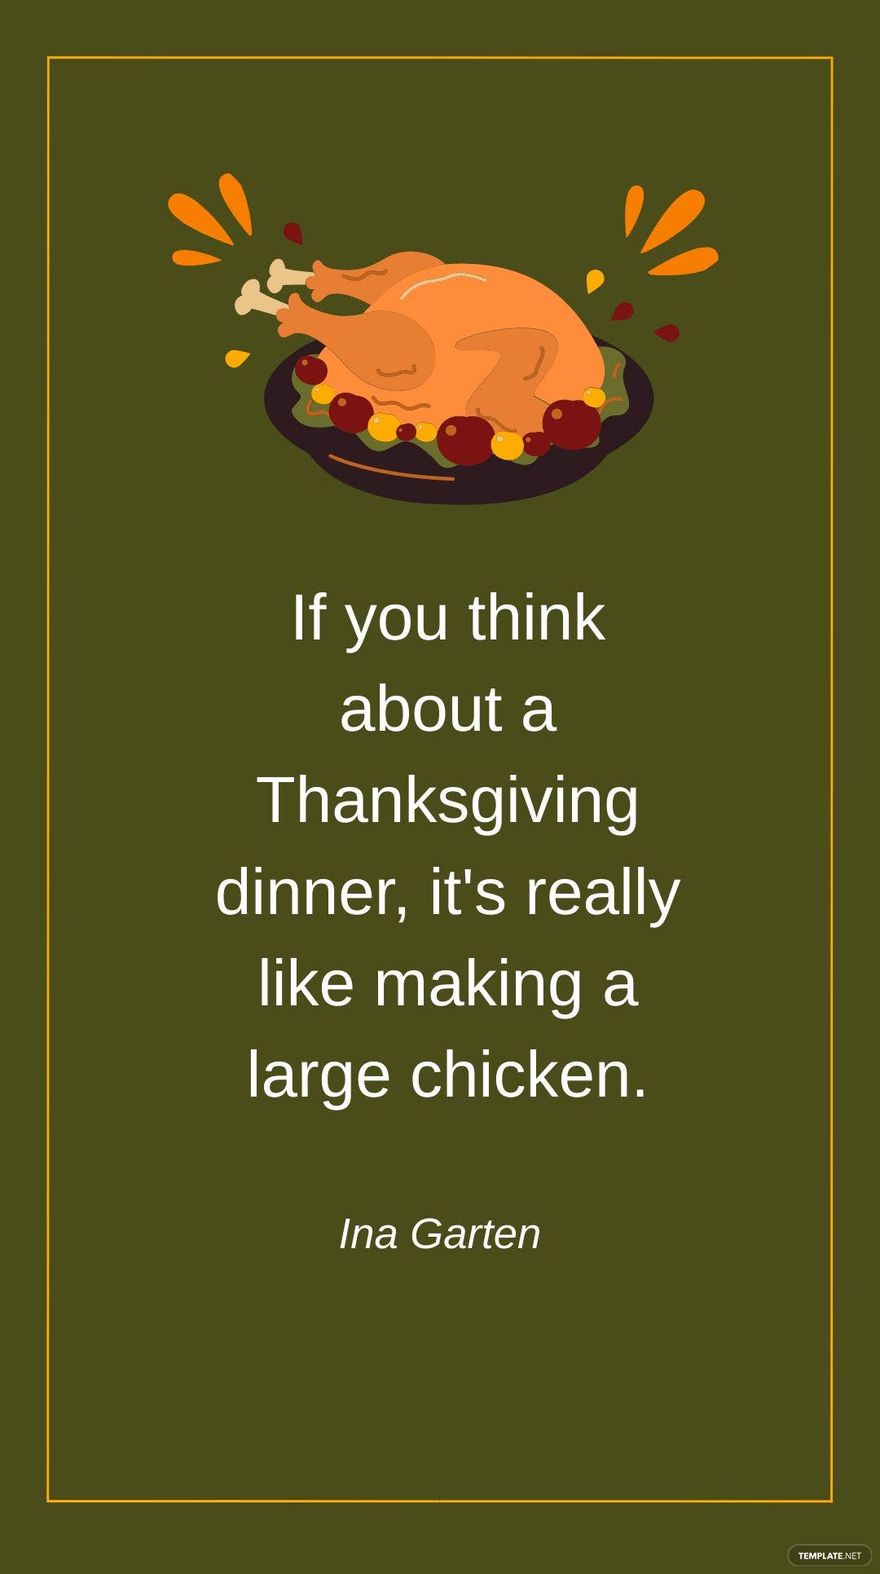 Ina Garten - If you think about a Thanksgiving dinner, it's really like making a large chicken. in JPG